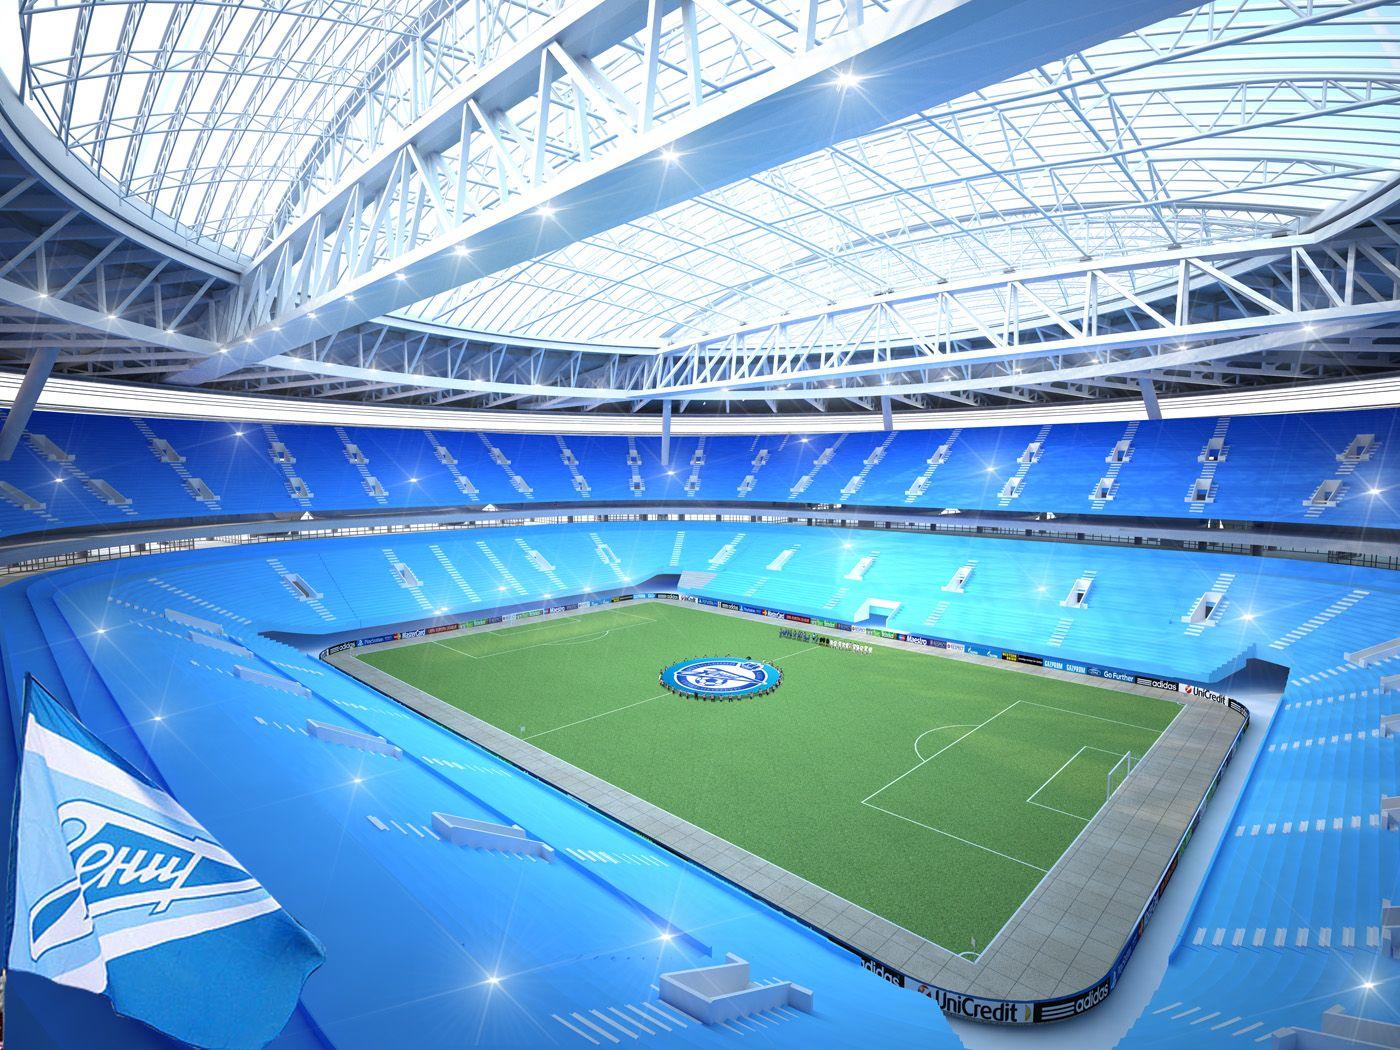 Transstroy reveal image of Eastern Europe's largest stadium: a